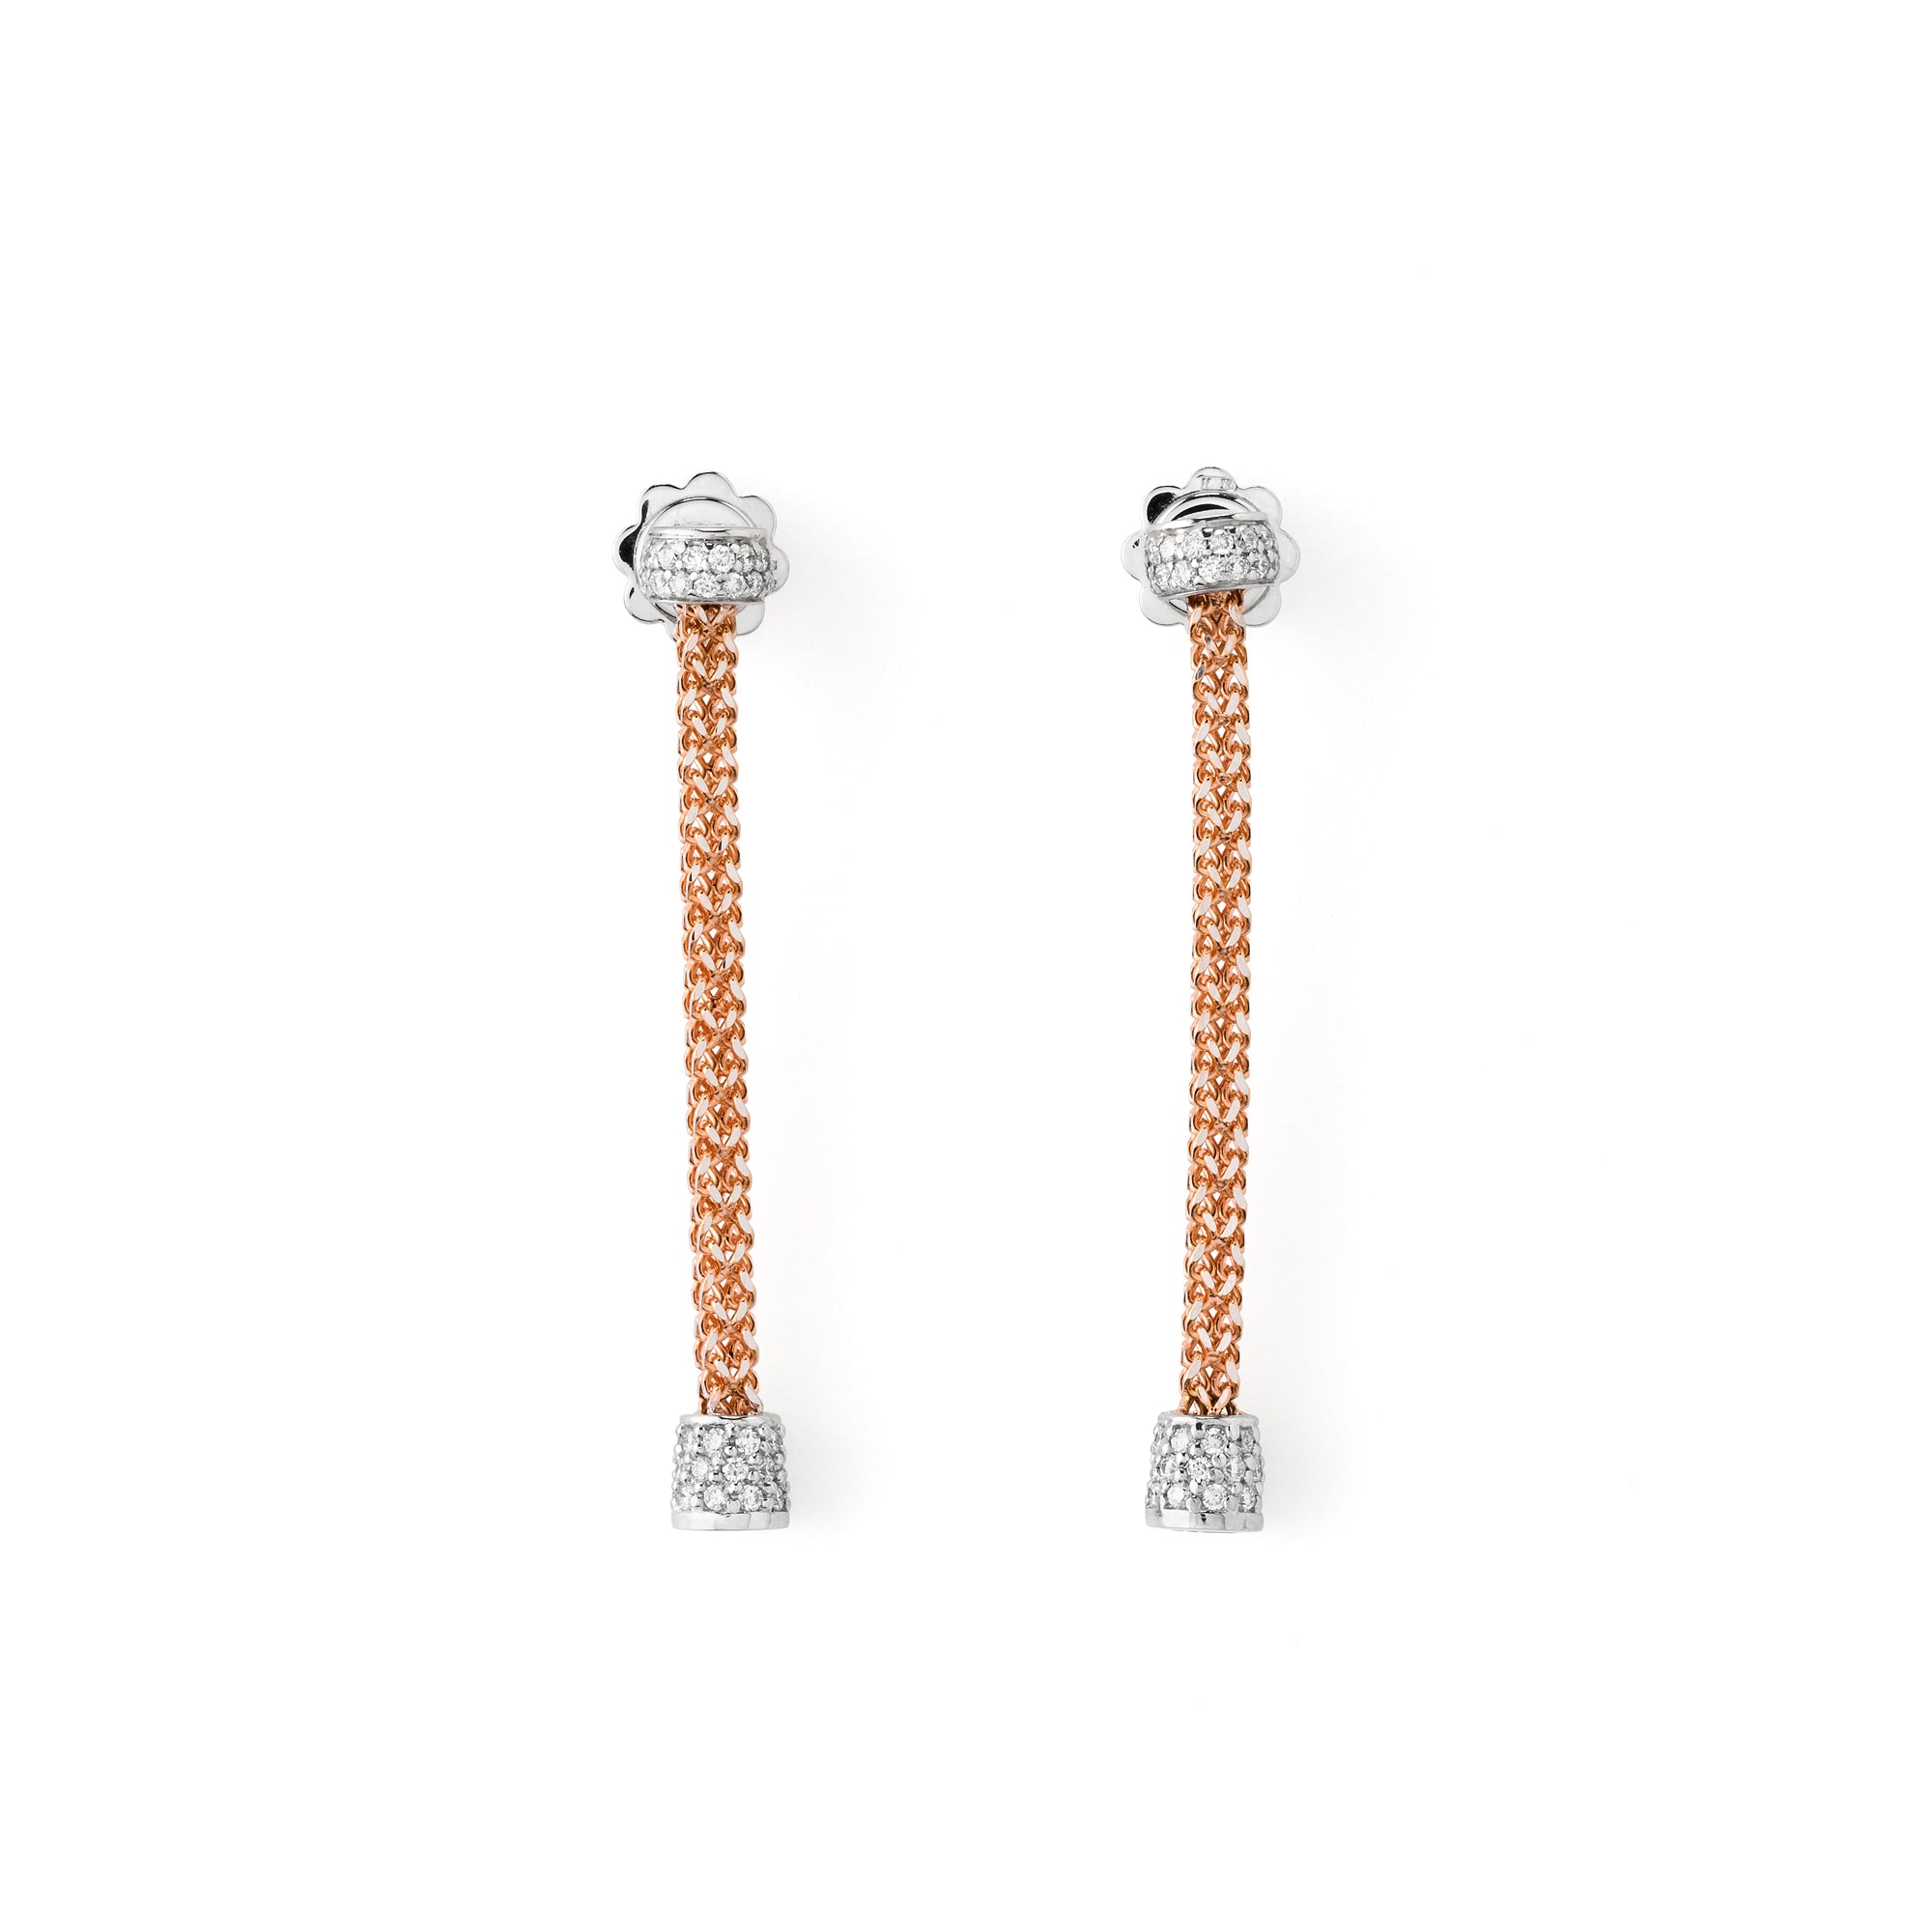 Heritage earrings rose gold and diamonds